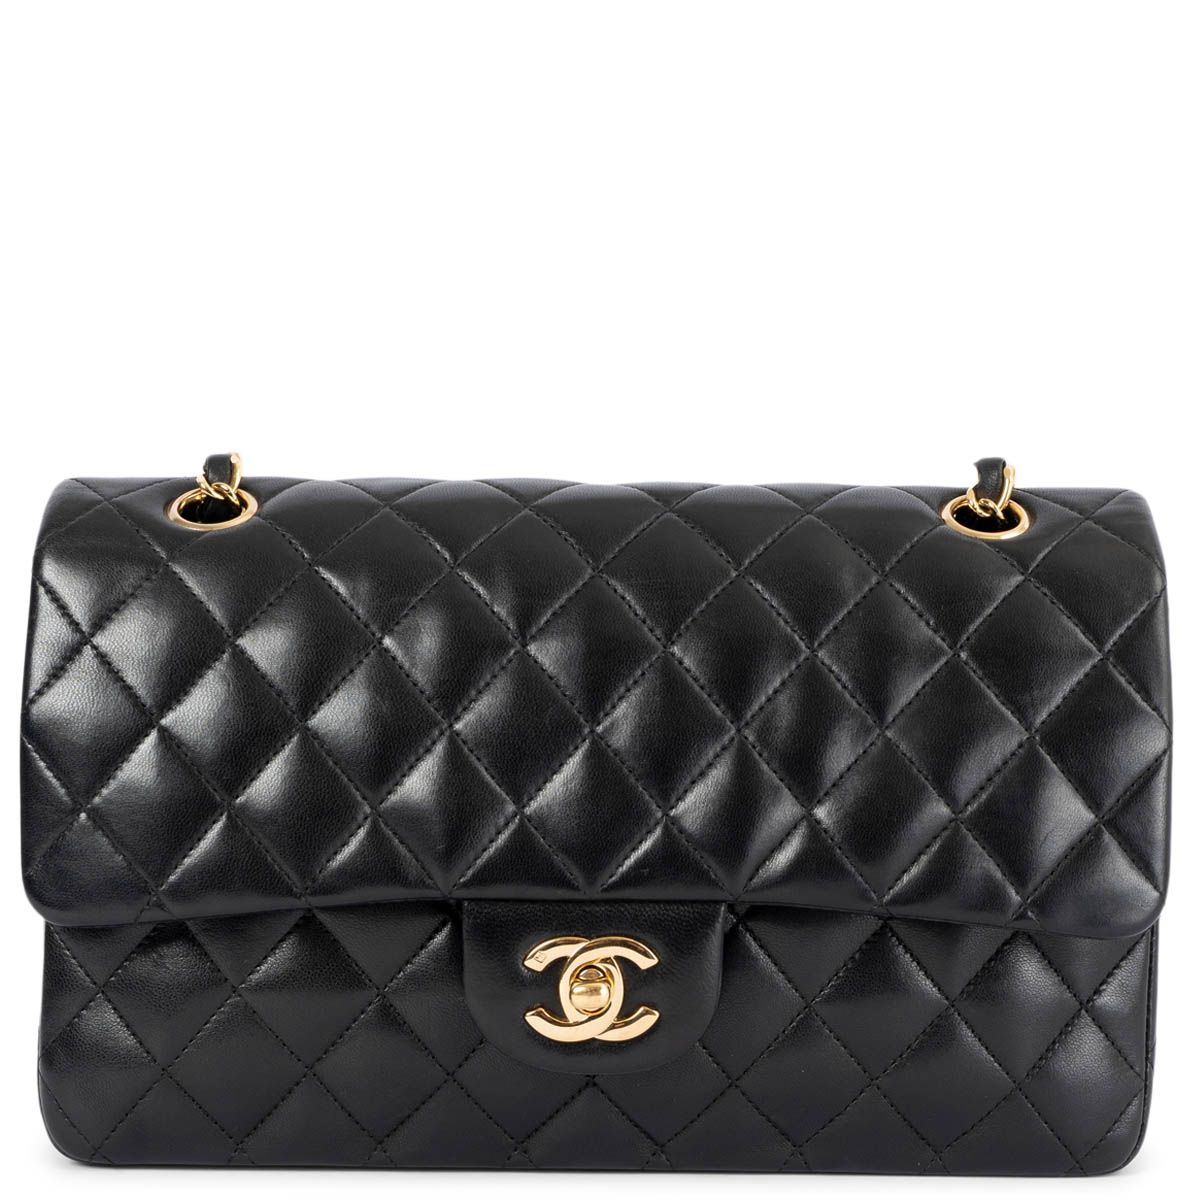 can you buy a chanel bag online